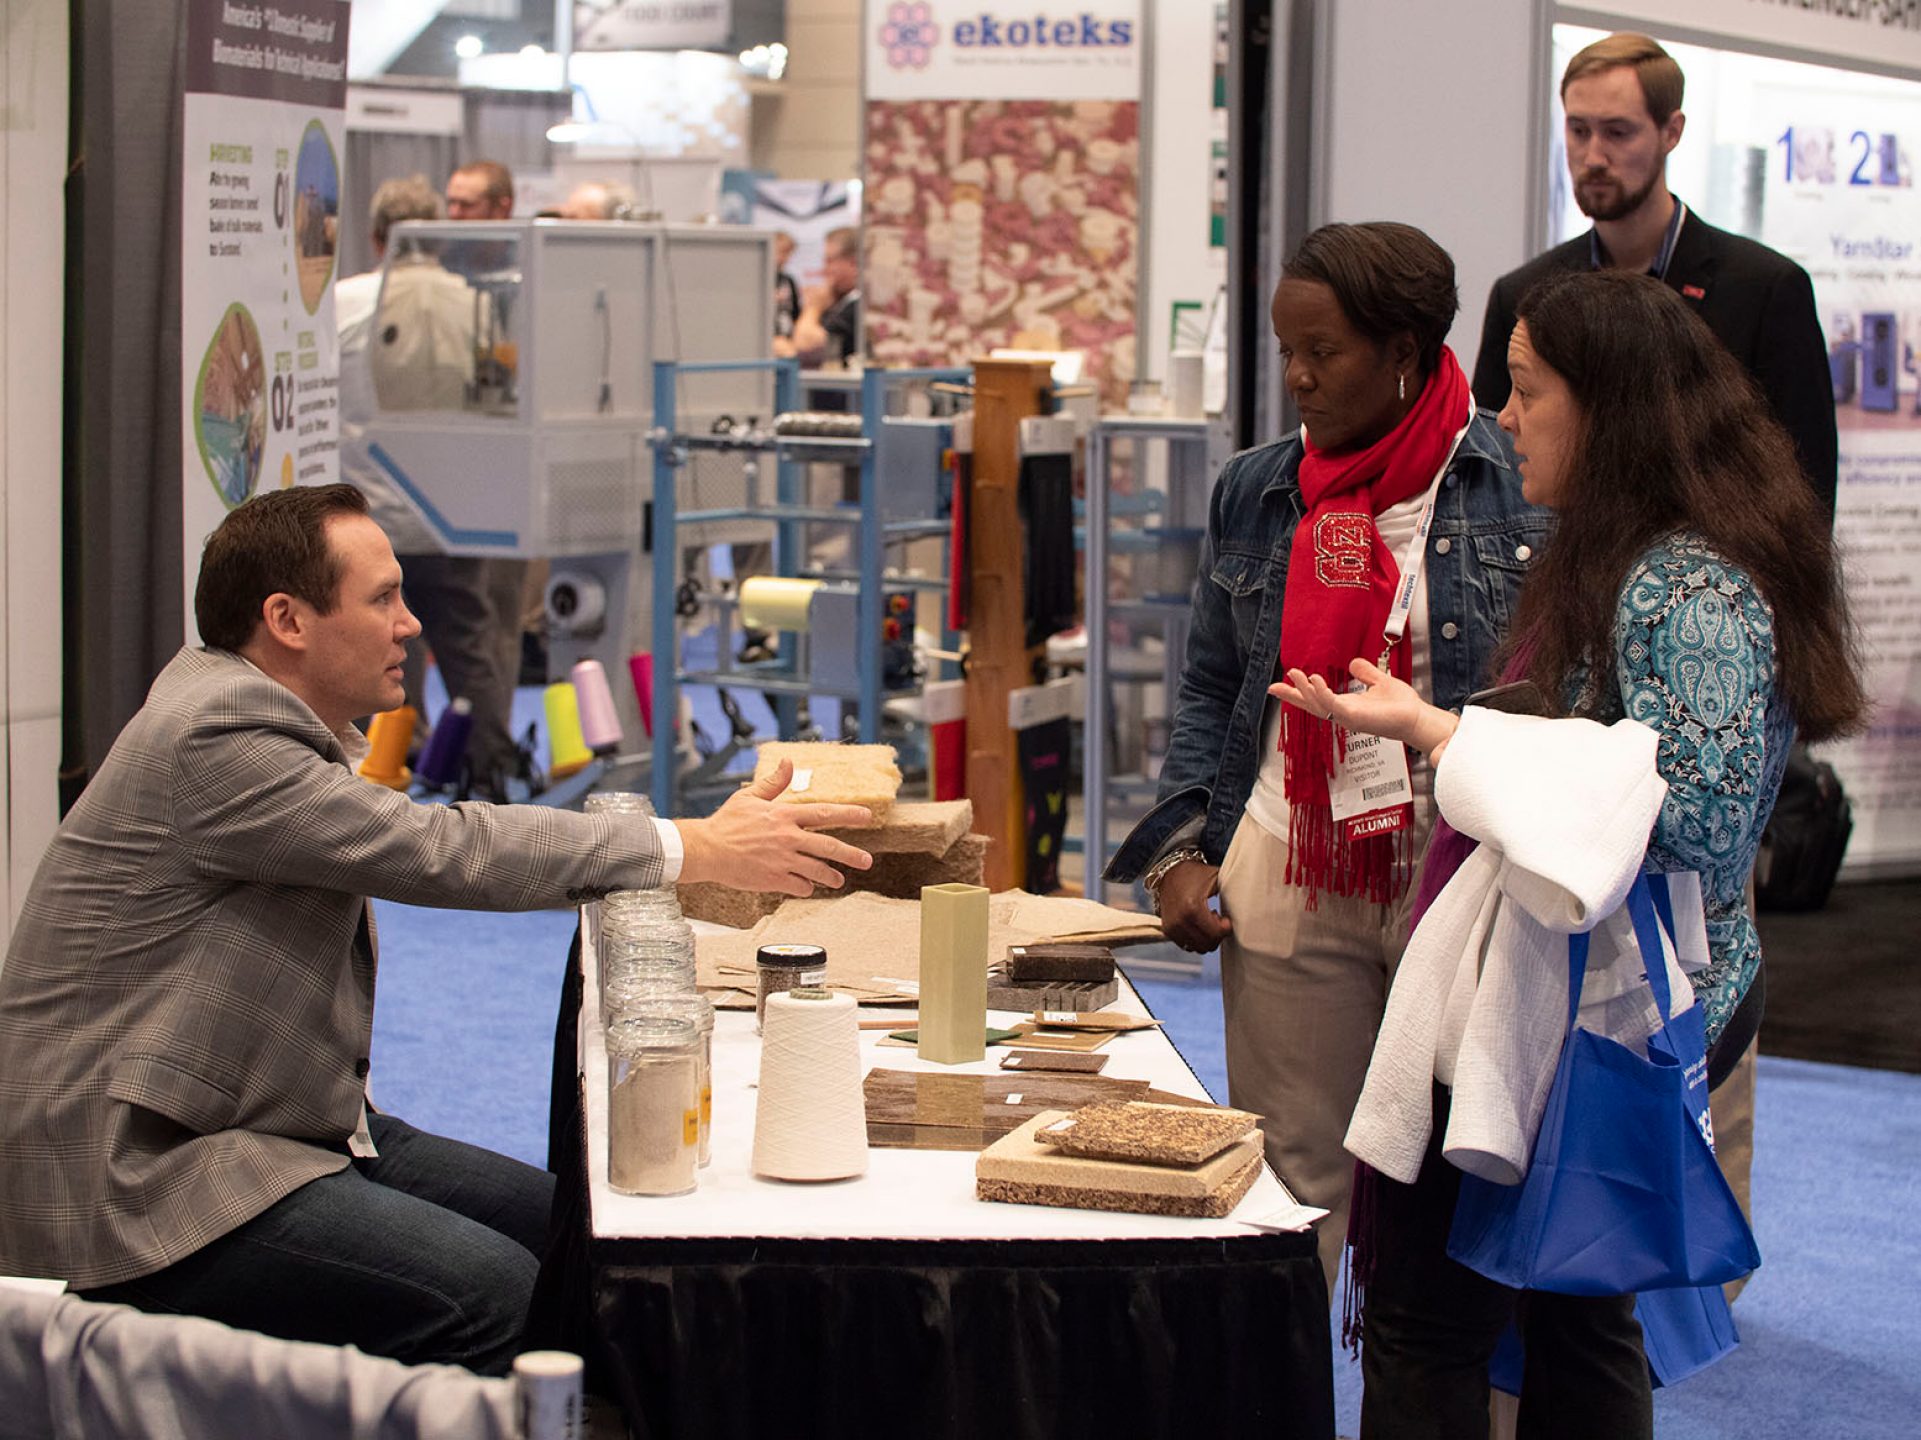 The event brought 165 exhibitors to the Raleigh area. © Messe Frankfurt/ Techtextil North America 